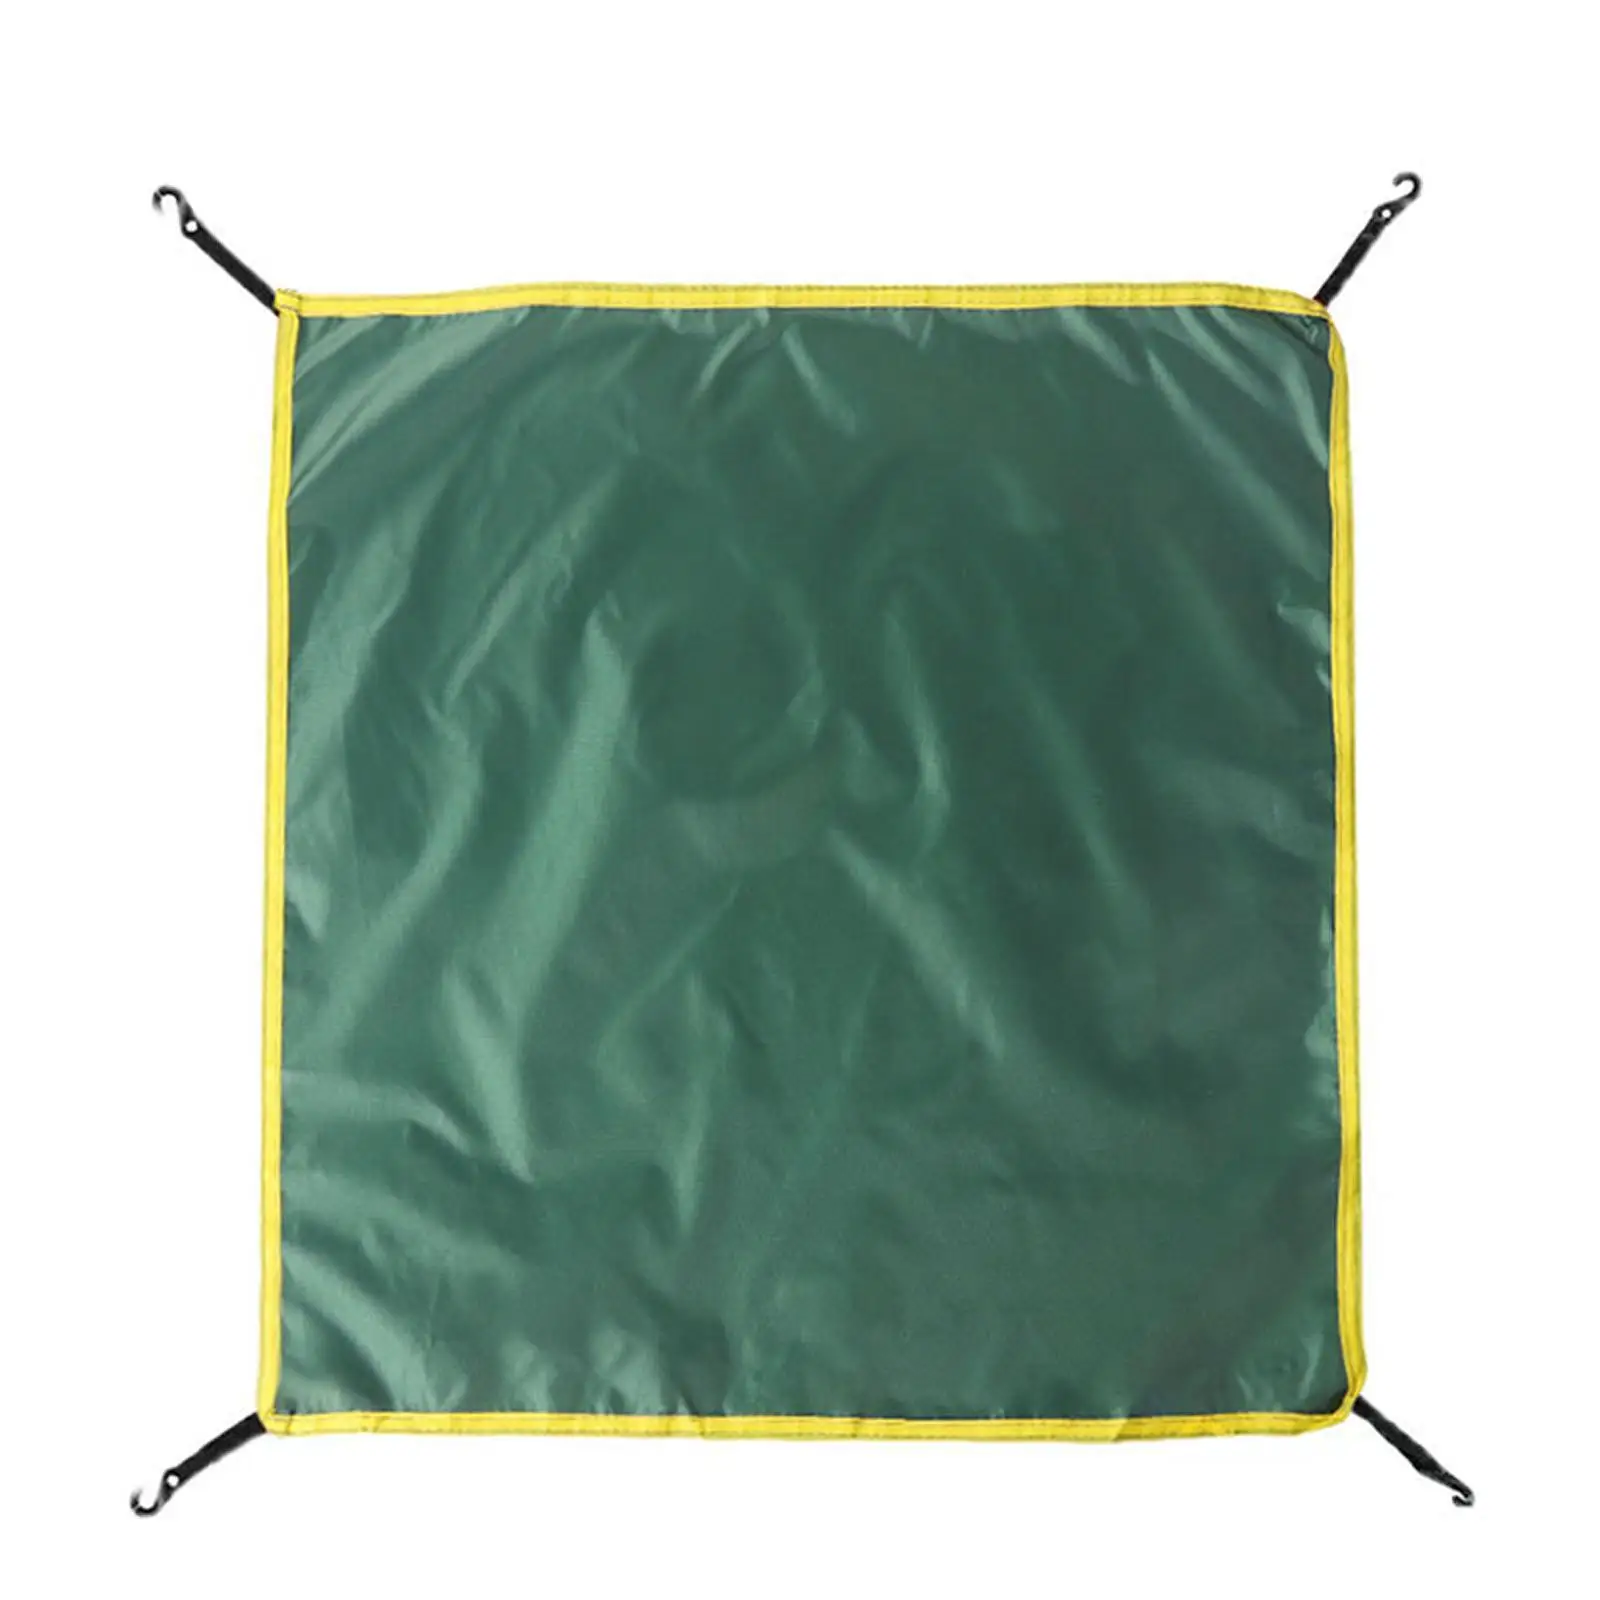 Rainfly Accessory Lightweight Tarp Fits 3-4 Person Instant Tent for Hiking